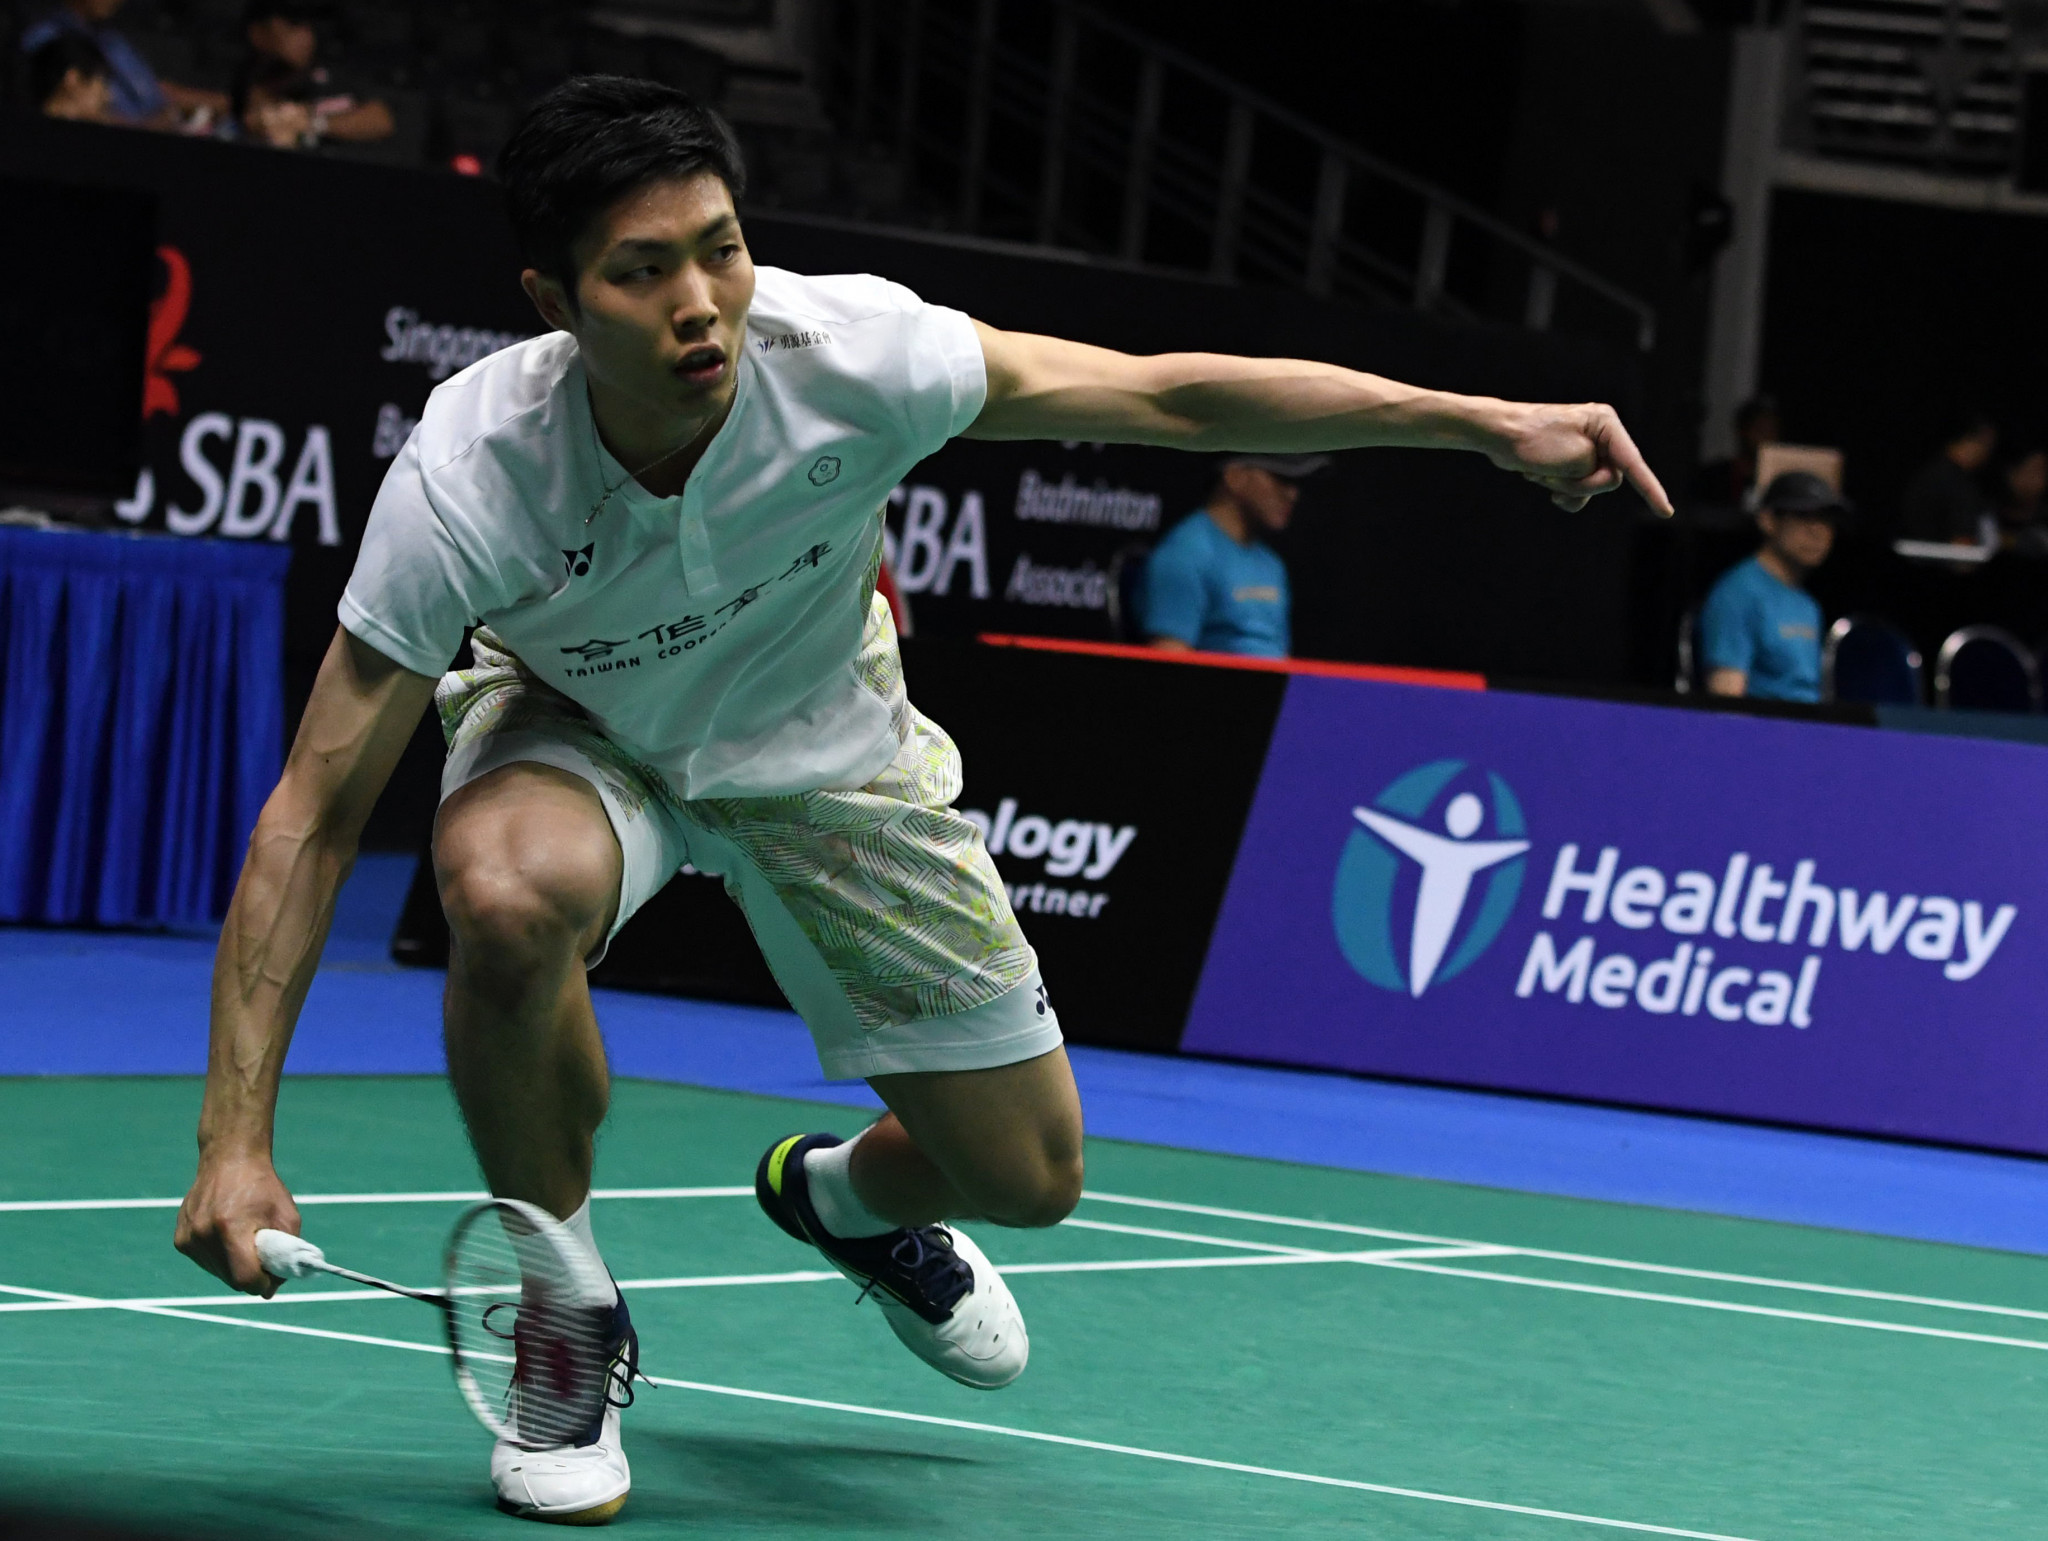 Chou Tien Chen of Chinese Taipei booked his place in the final of the men's tournament ©Getty Images